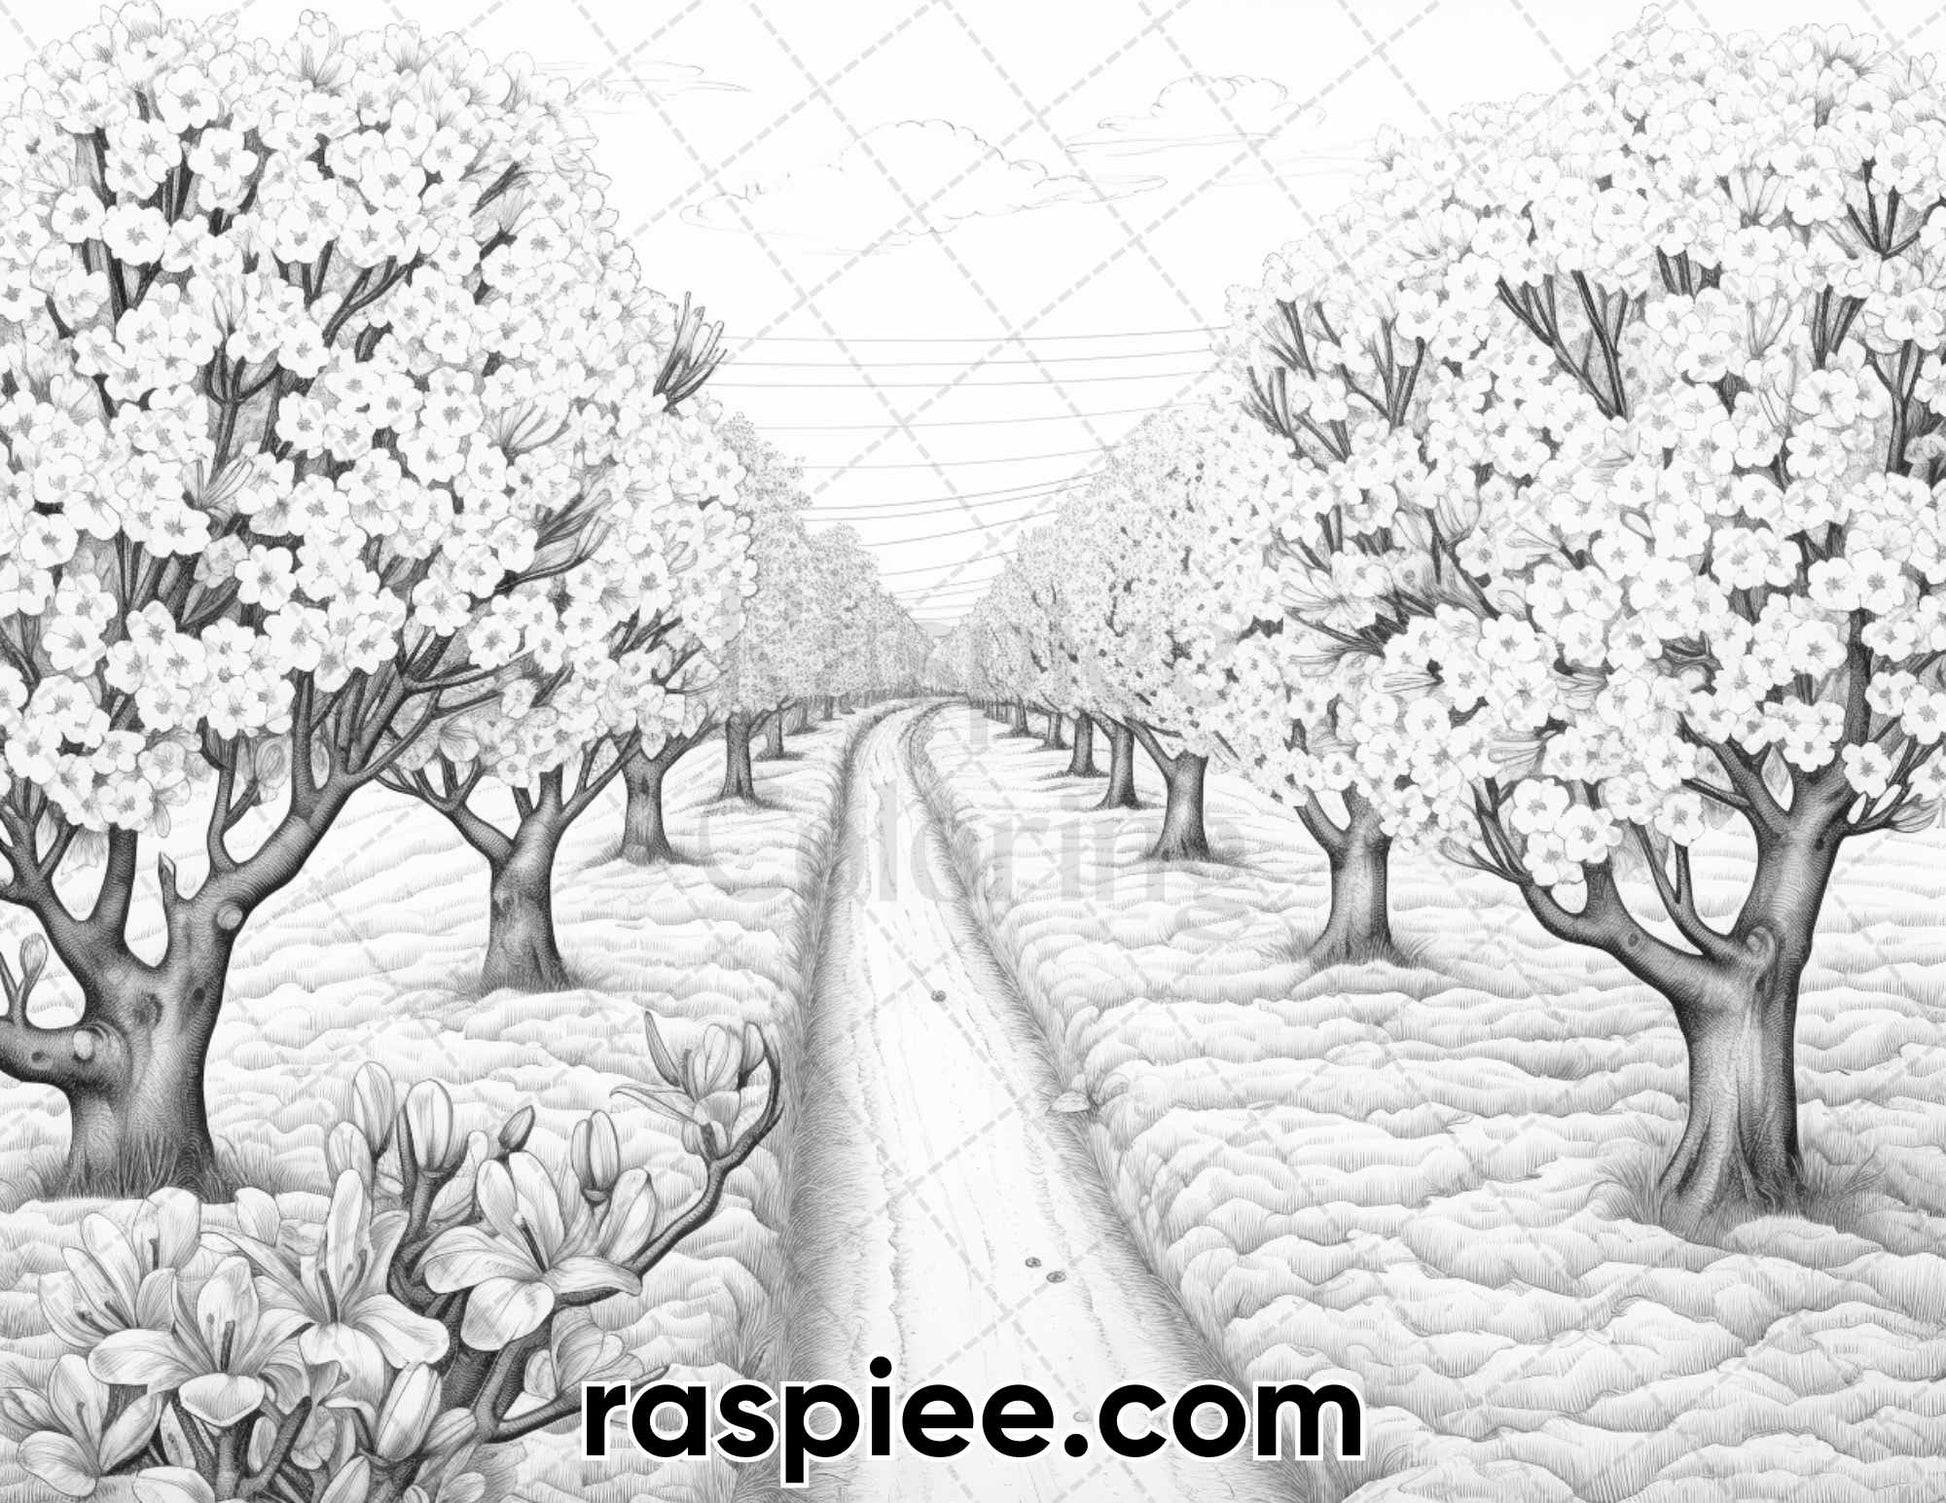 adult coloring pages, adult coloring sheets, adult coloring book pdf, adult coloring book printable, grayscale coloring pages, grayscale coloring books, spring coloring pages for adults, spring coloring book pdf, landscapes coloring pages for adults, farm life coloring pages, farm animal coloring pages